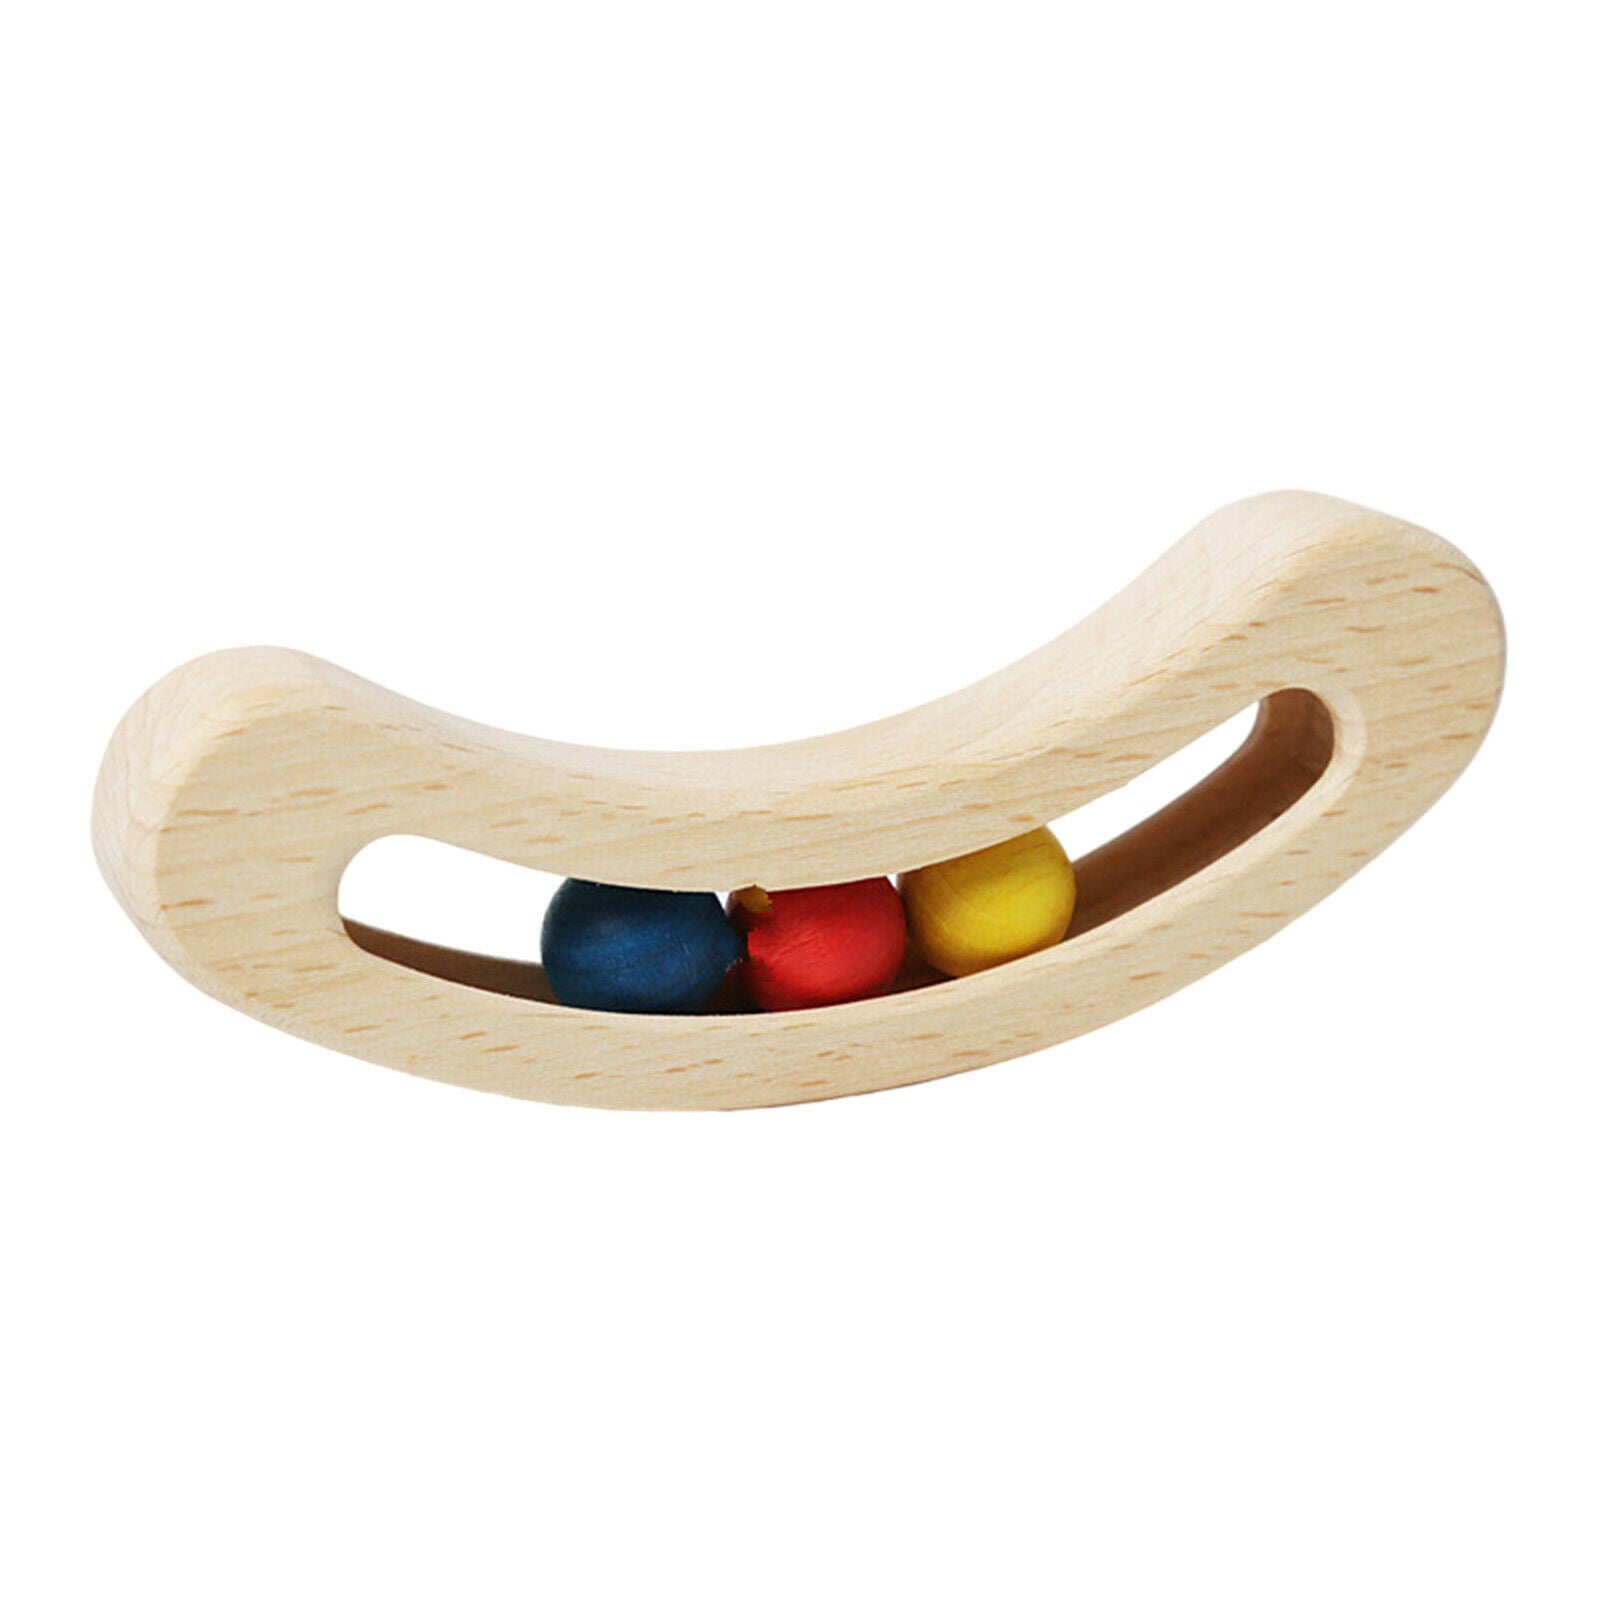 Handcrafted wooden rattle bead gripping toys for toddlers Montessori